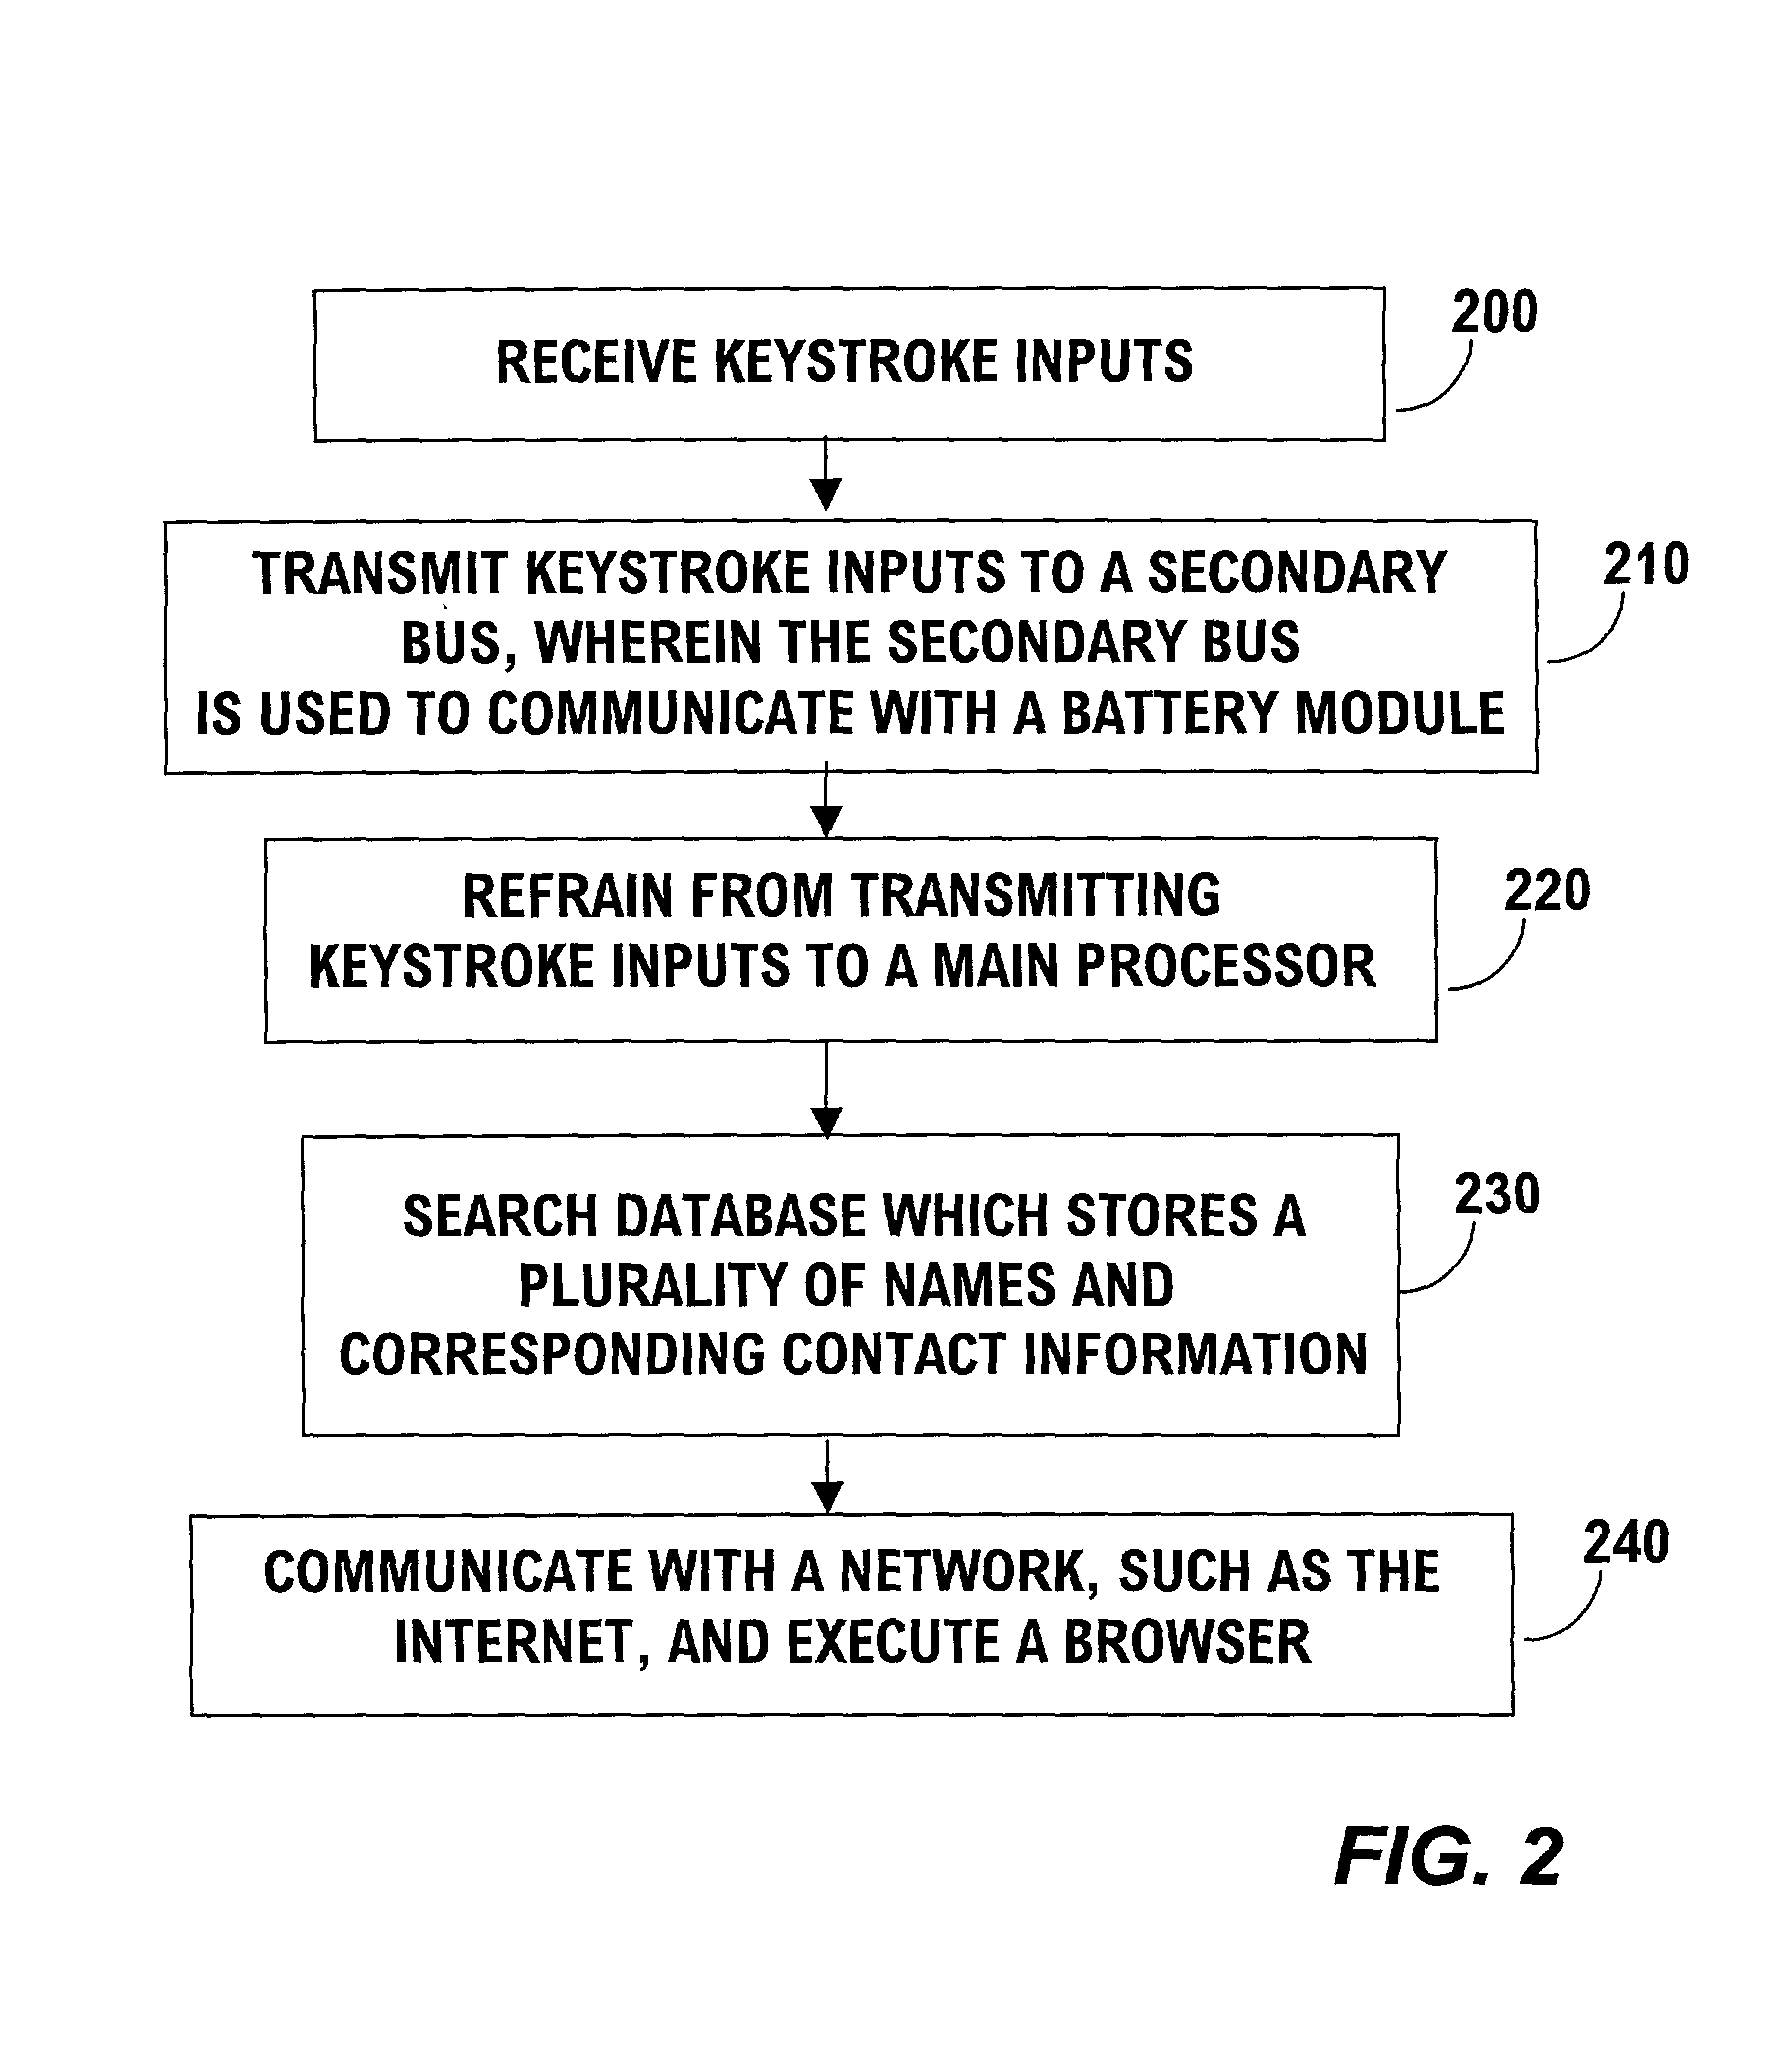 Computing device having a low power secondary processor coupled to a keyboard controller